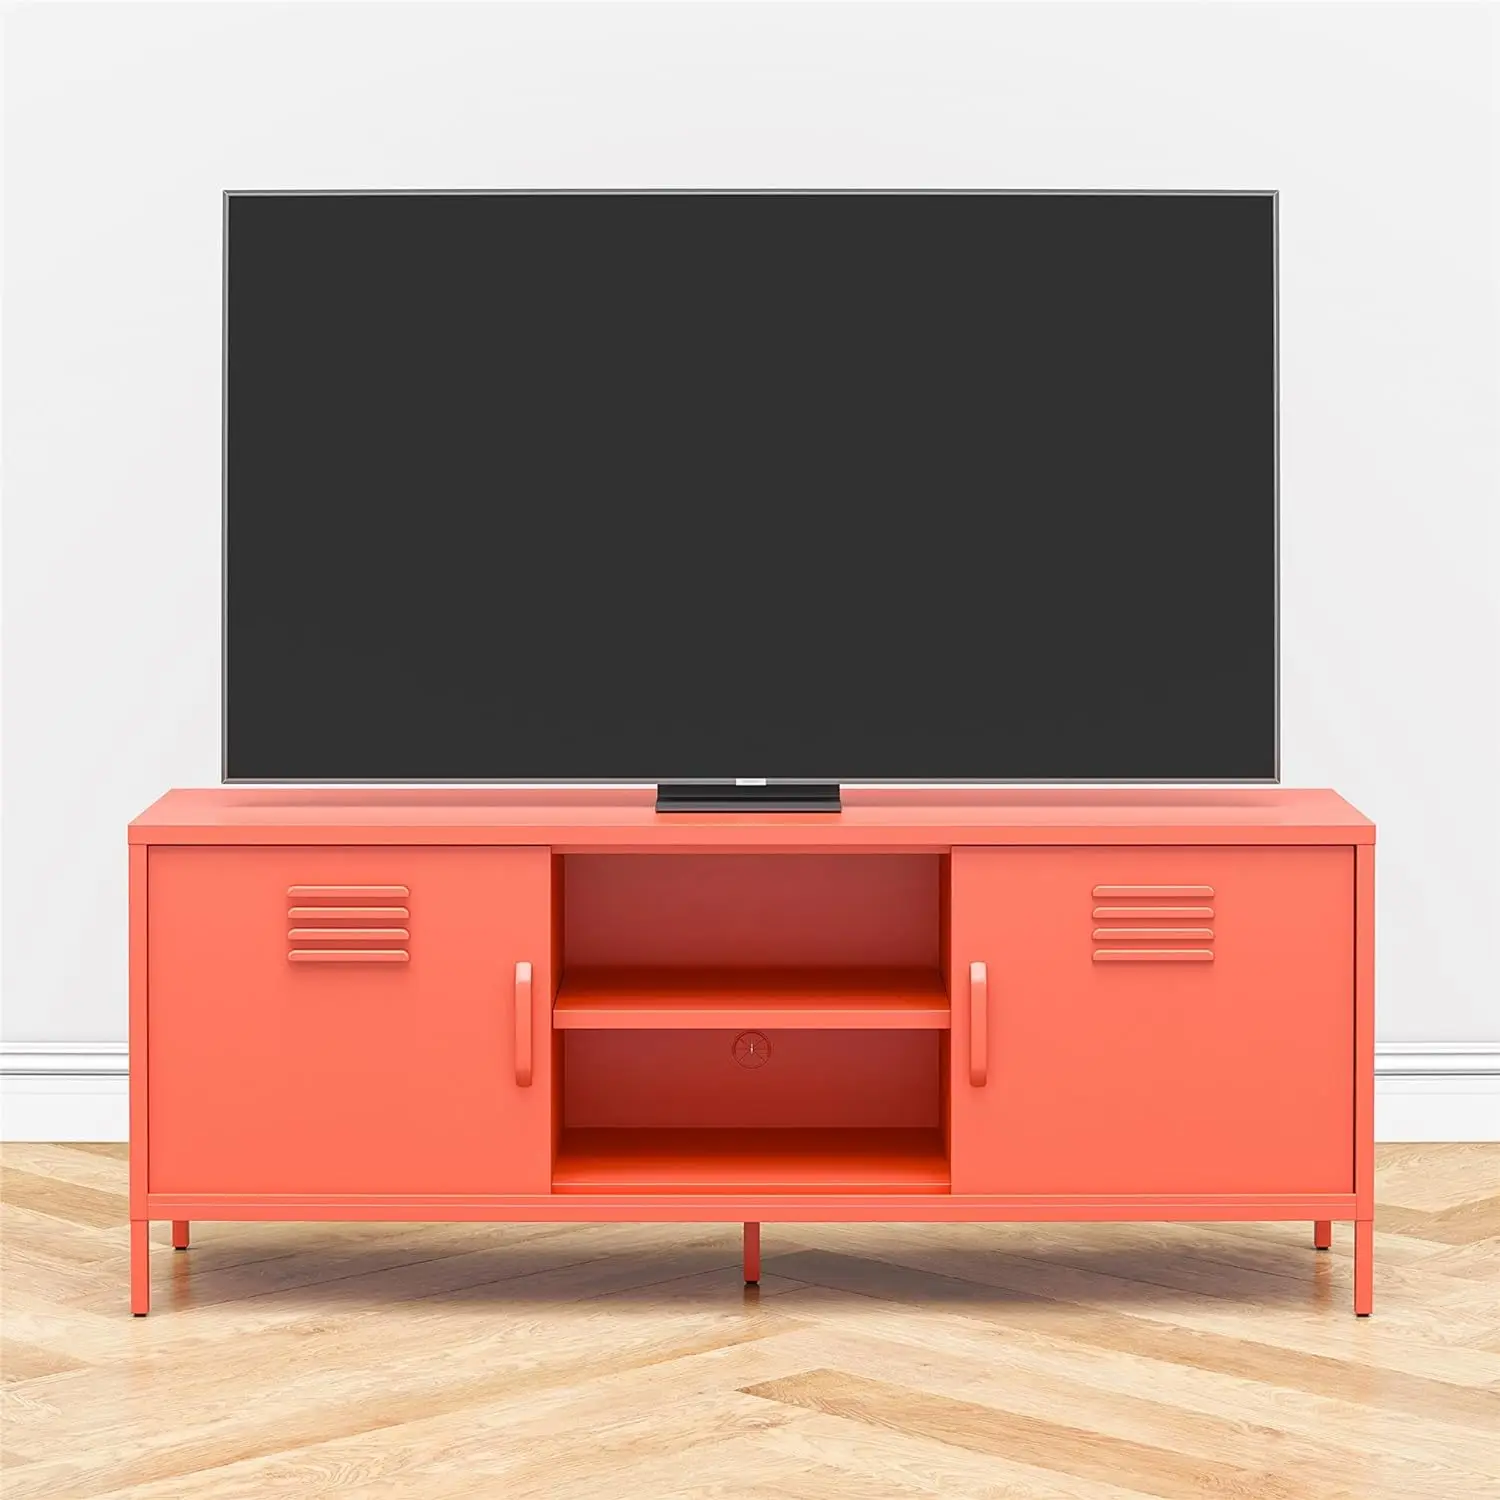 

Cache Metal Locker-Style TV Stand for TVs up to 65", Orange